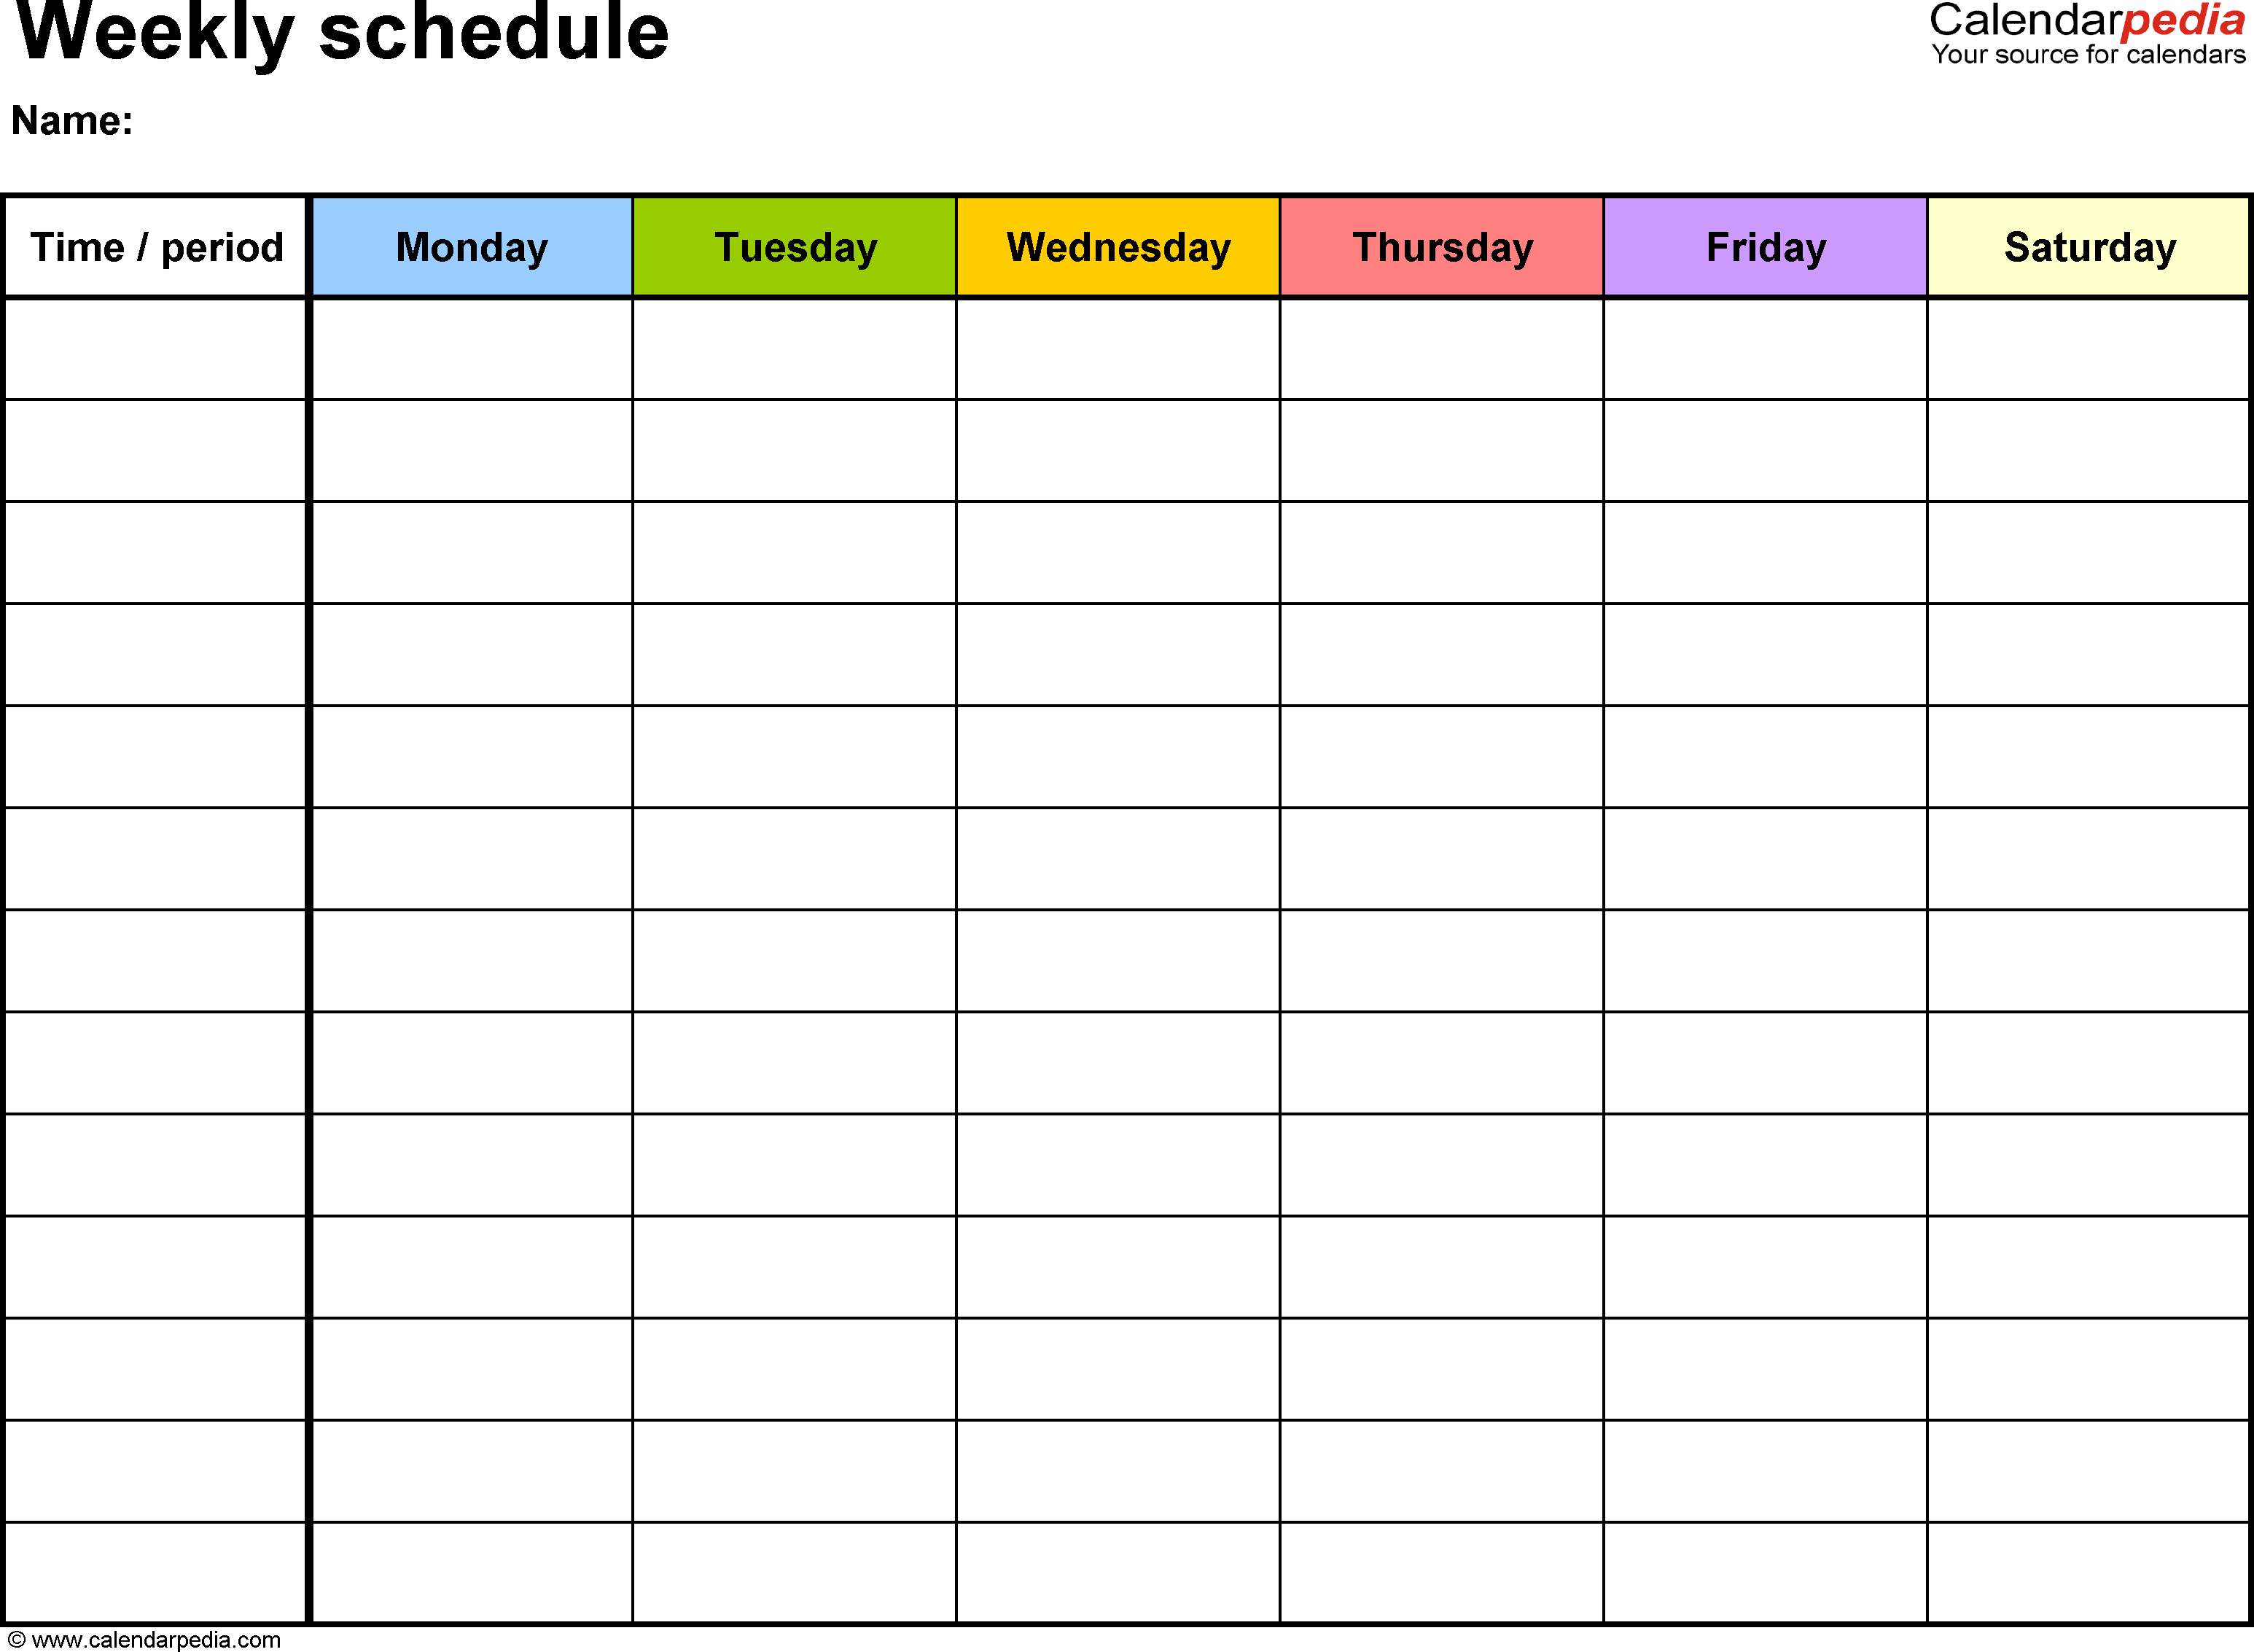 Weekly Schedule Template Free